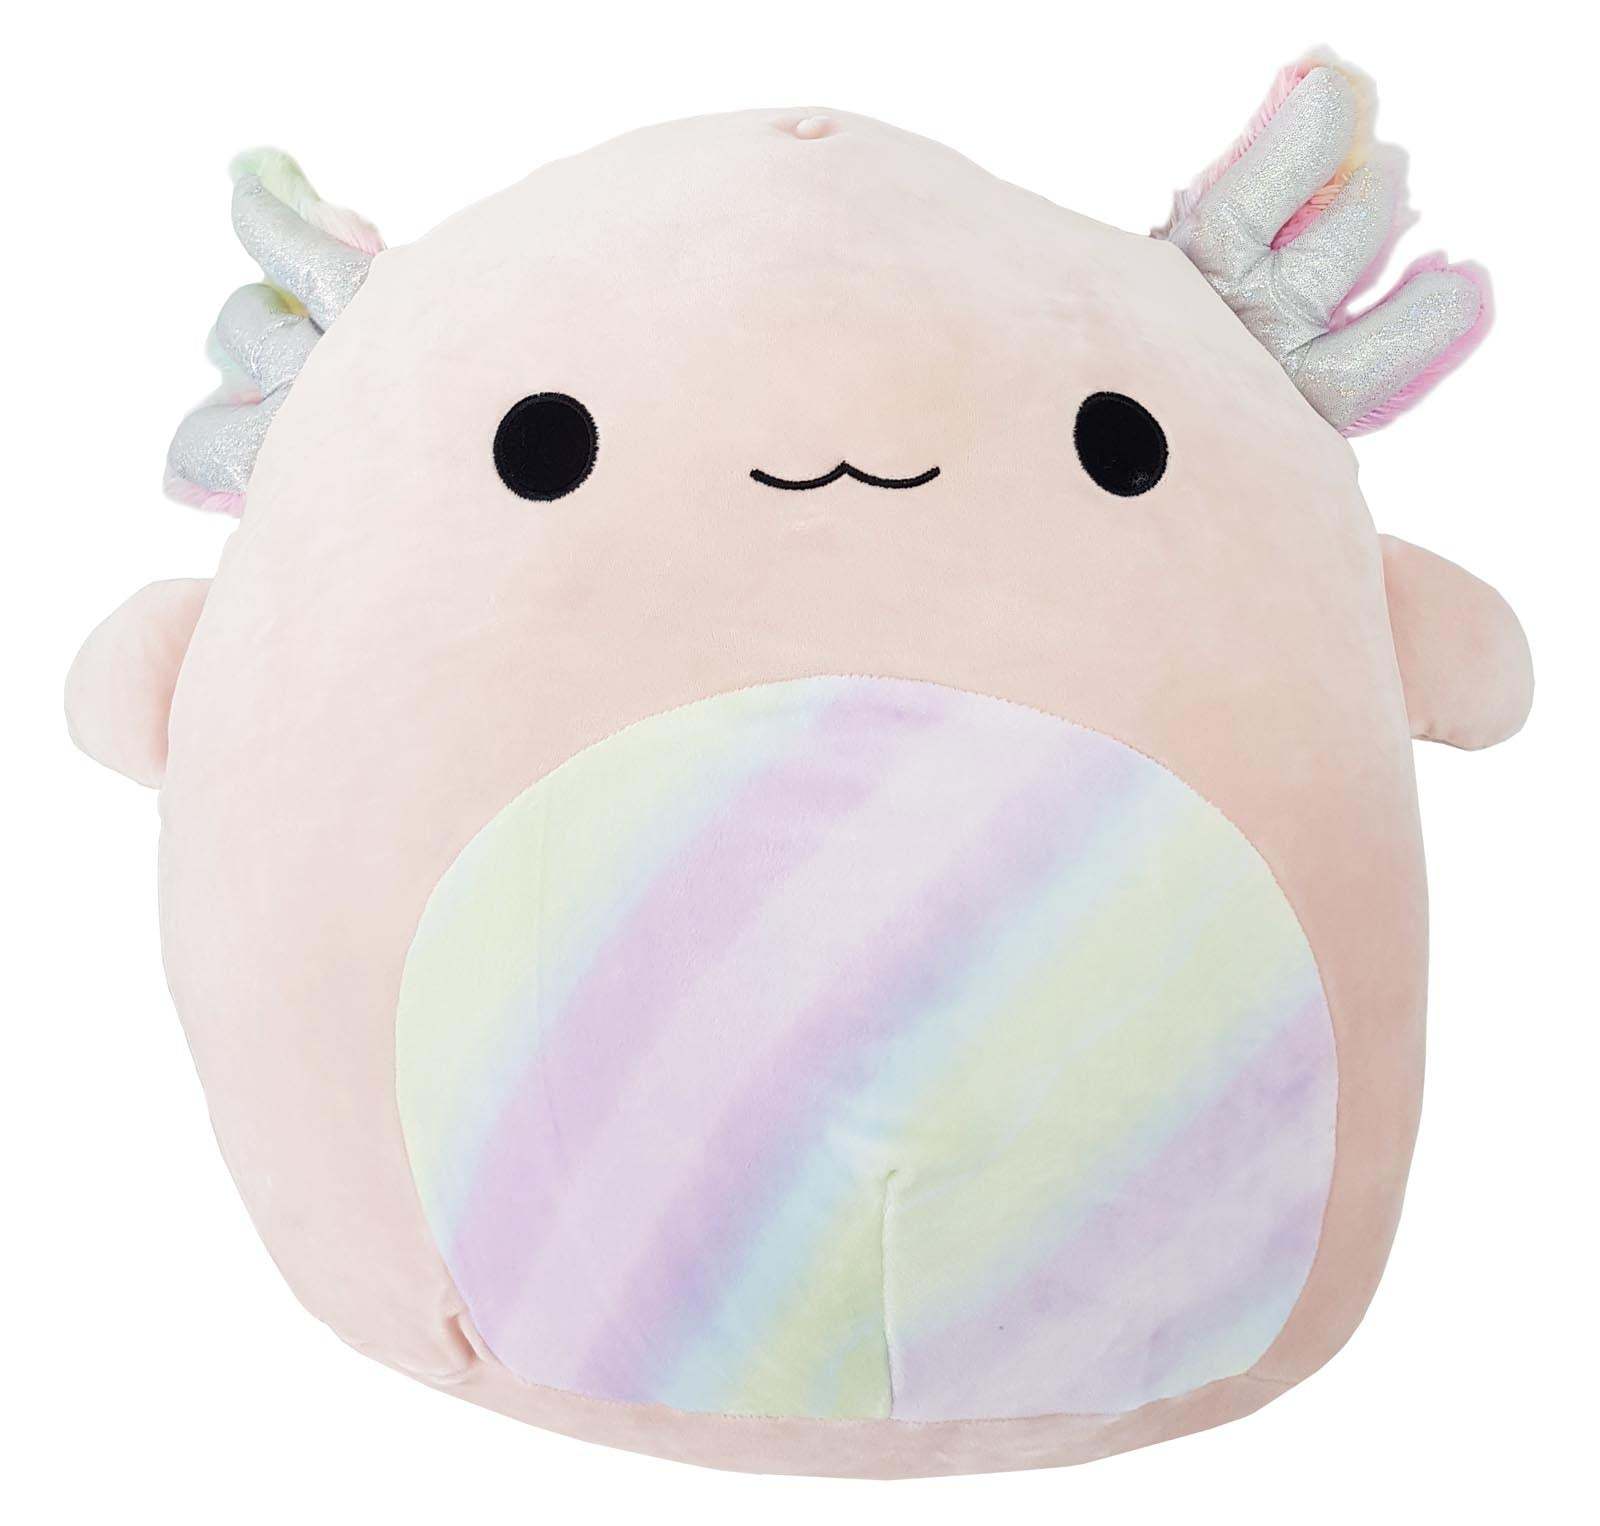 Elephant Squishmallow 16 Inch - The Furry Friend You